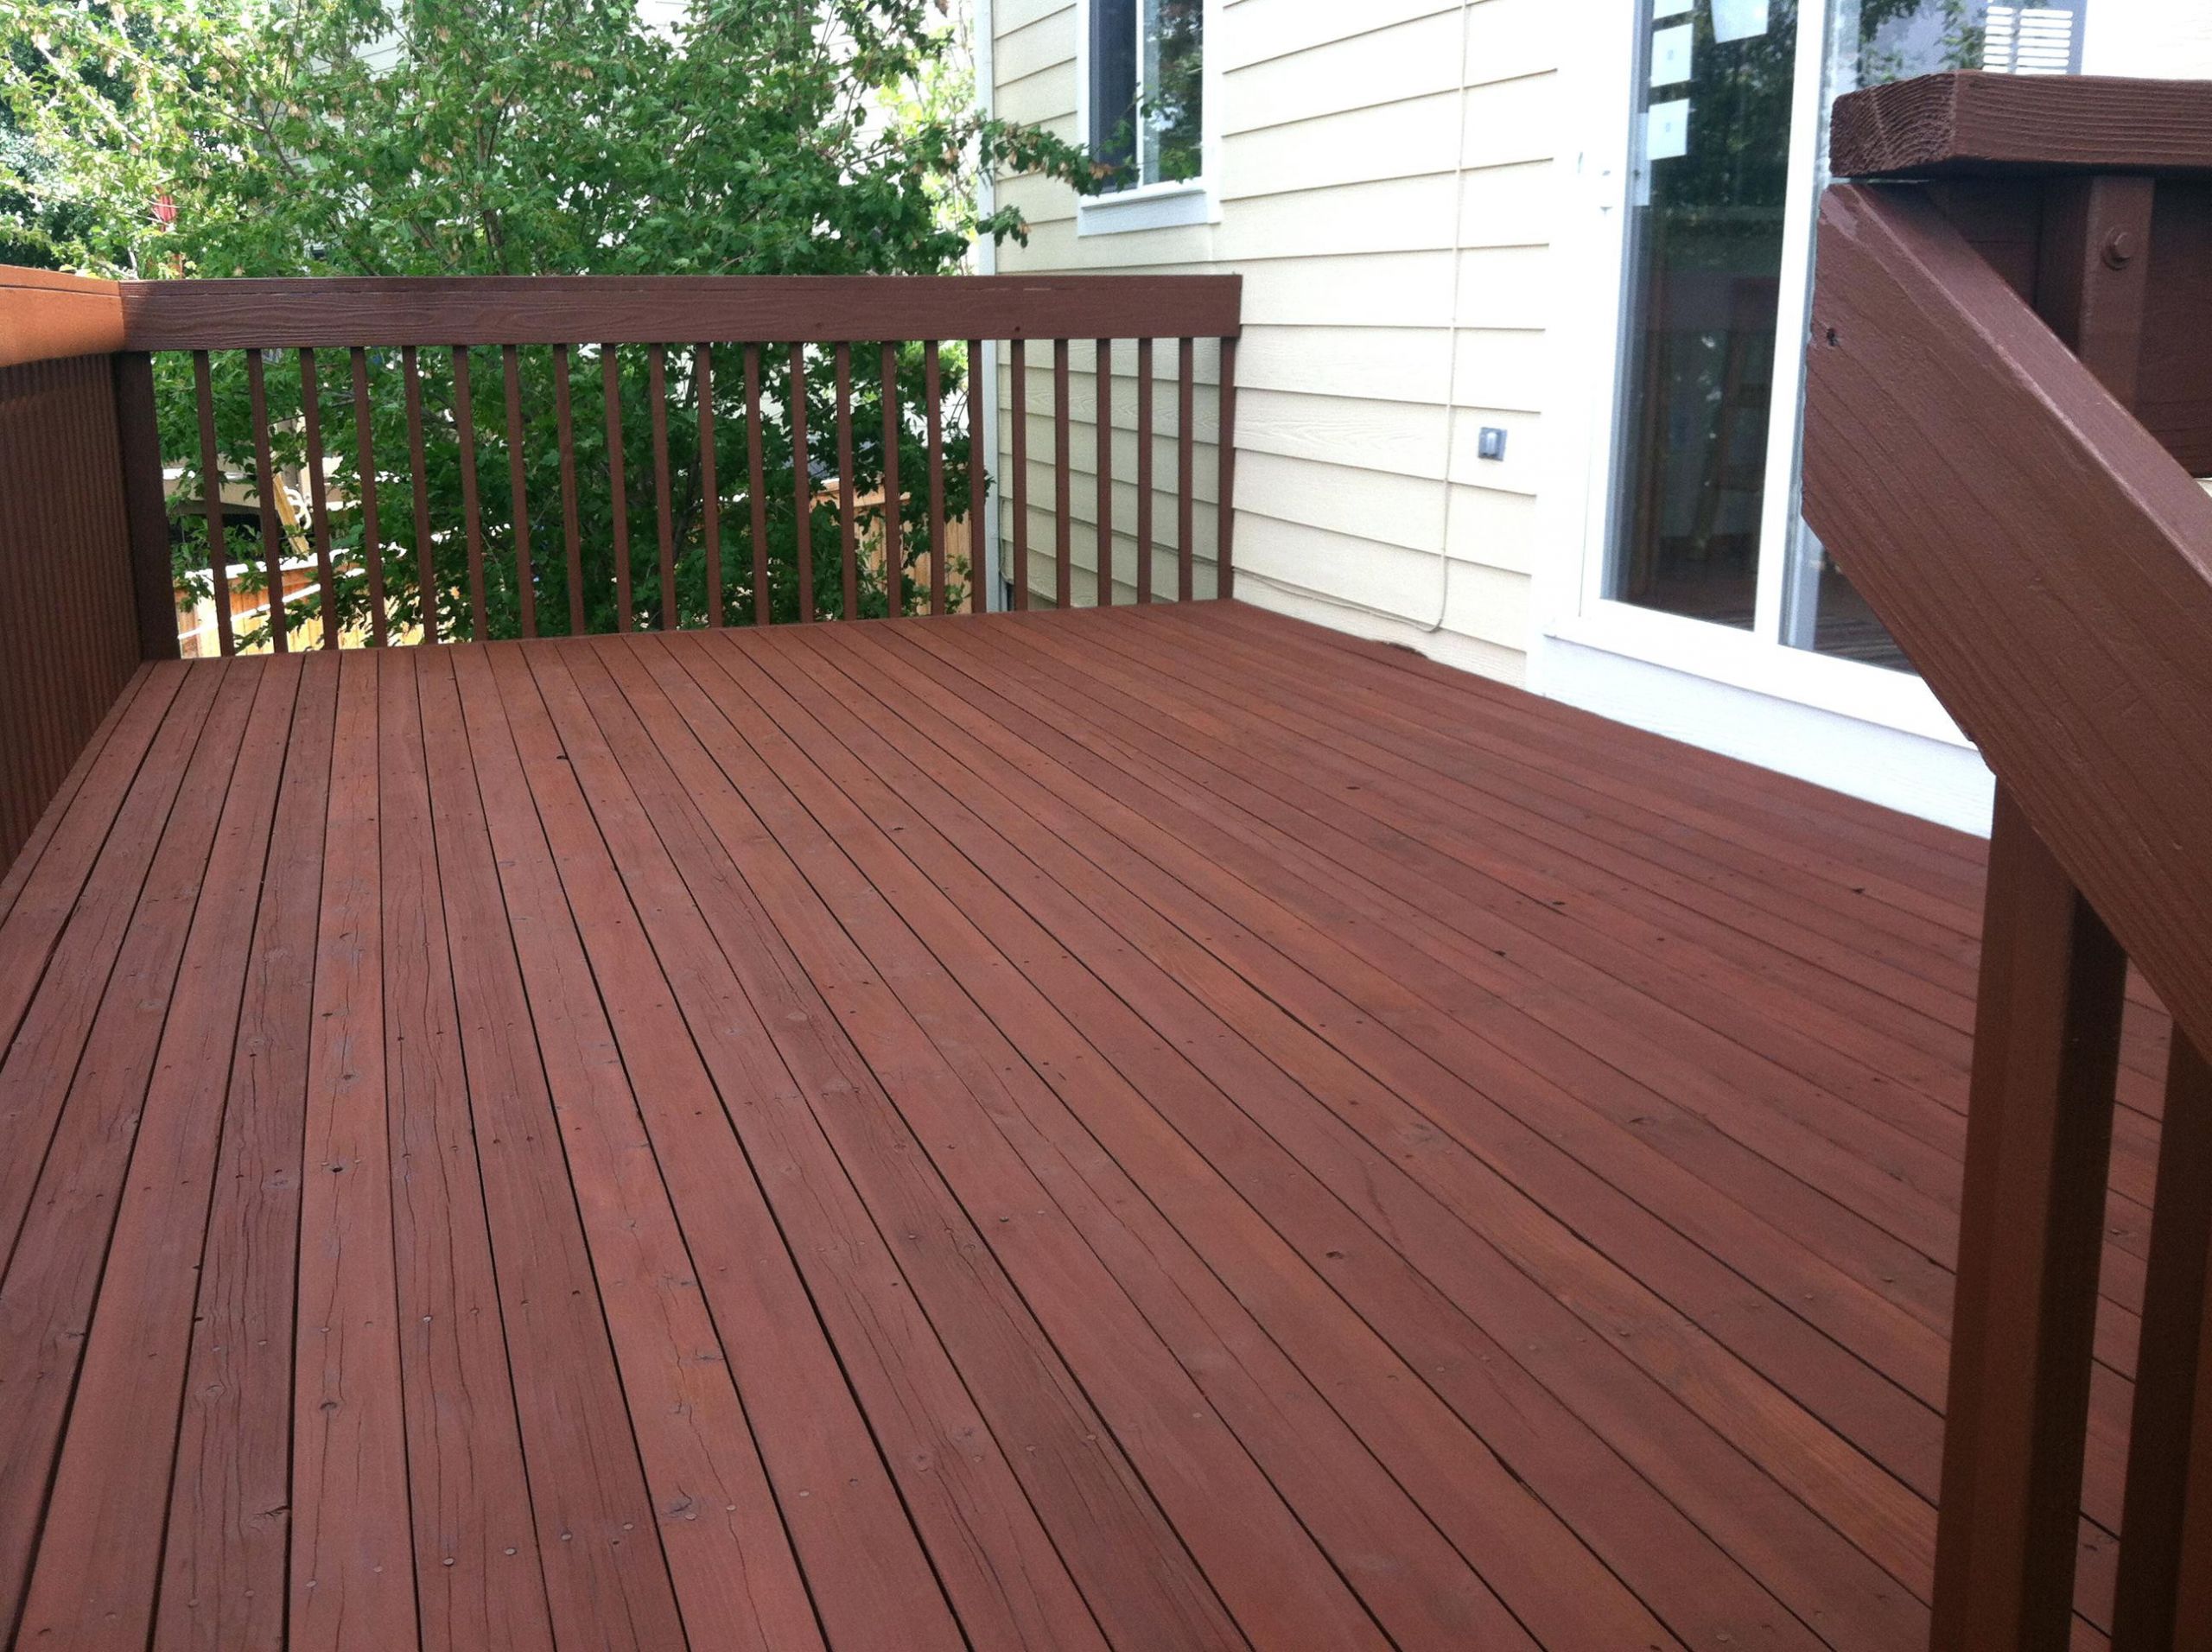 Behr Deck Paint Colors
 Decking Nice Outdoor Home Design With Behr Deck Paint